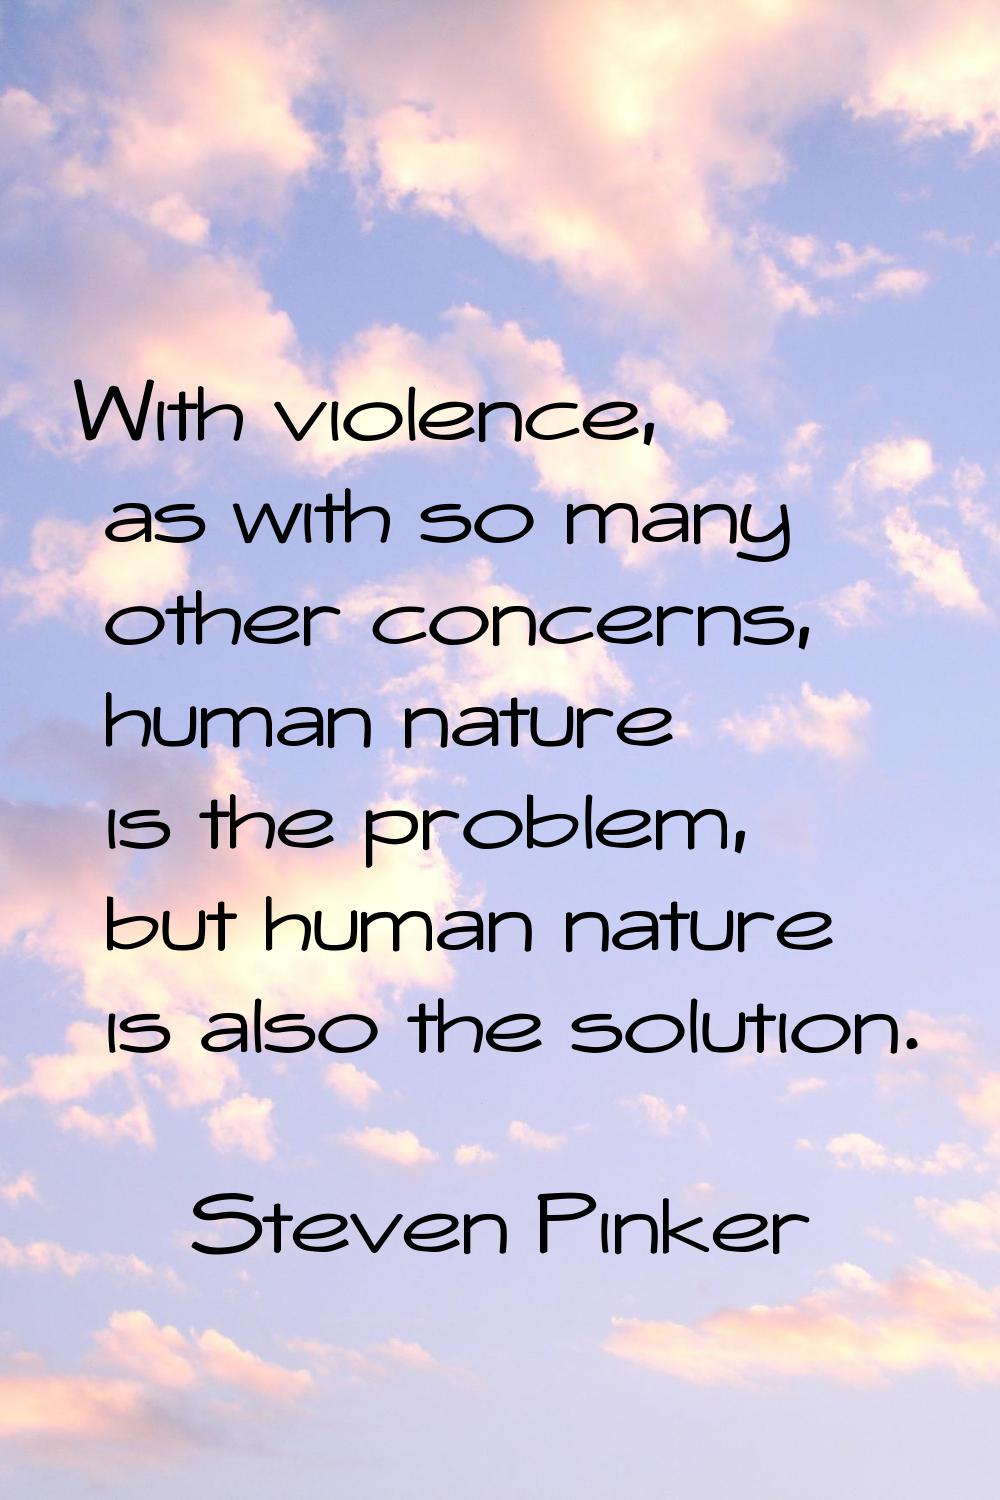 With violence, as with so many other concerns, human nature is the problem, but human nature is als